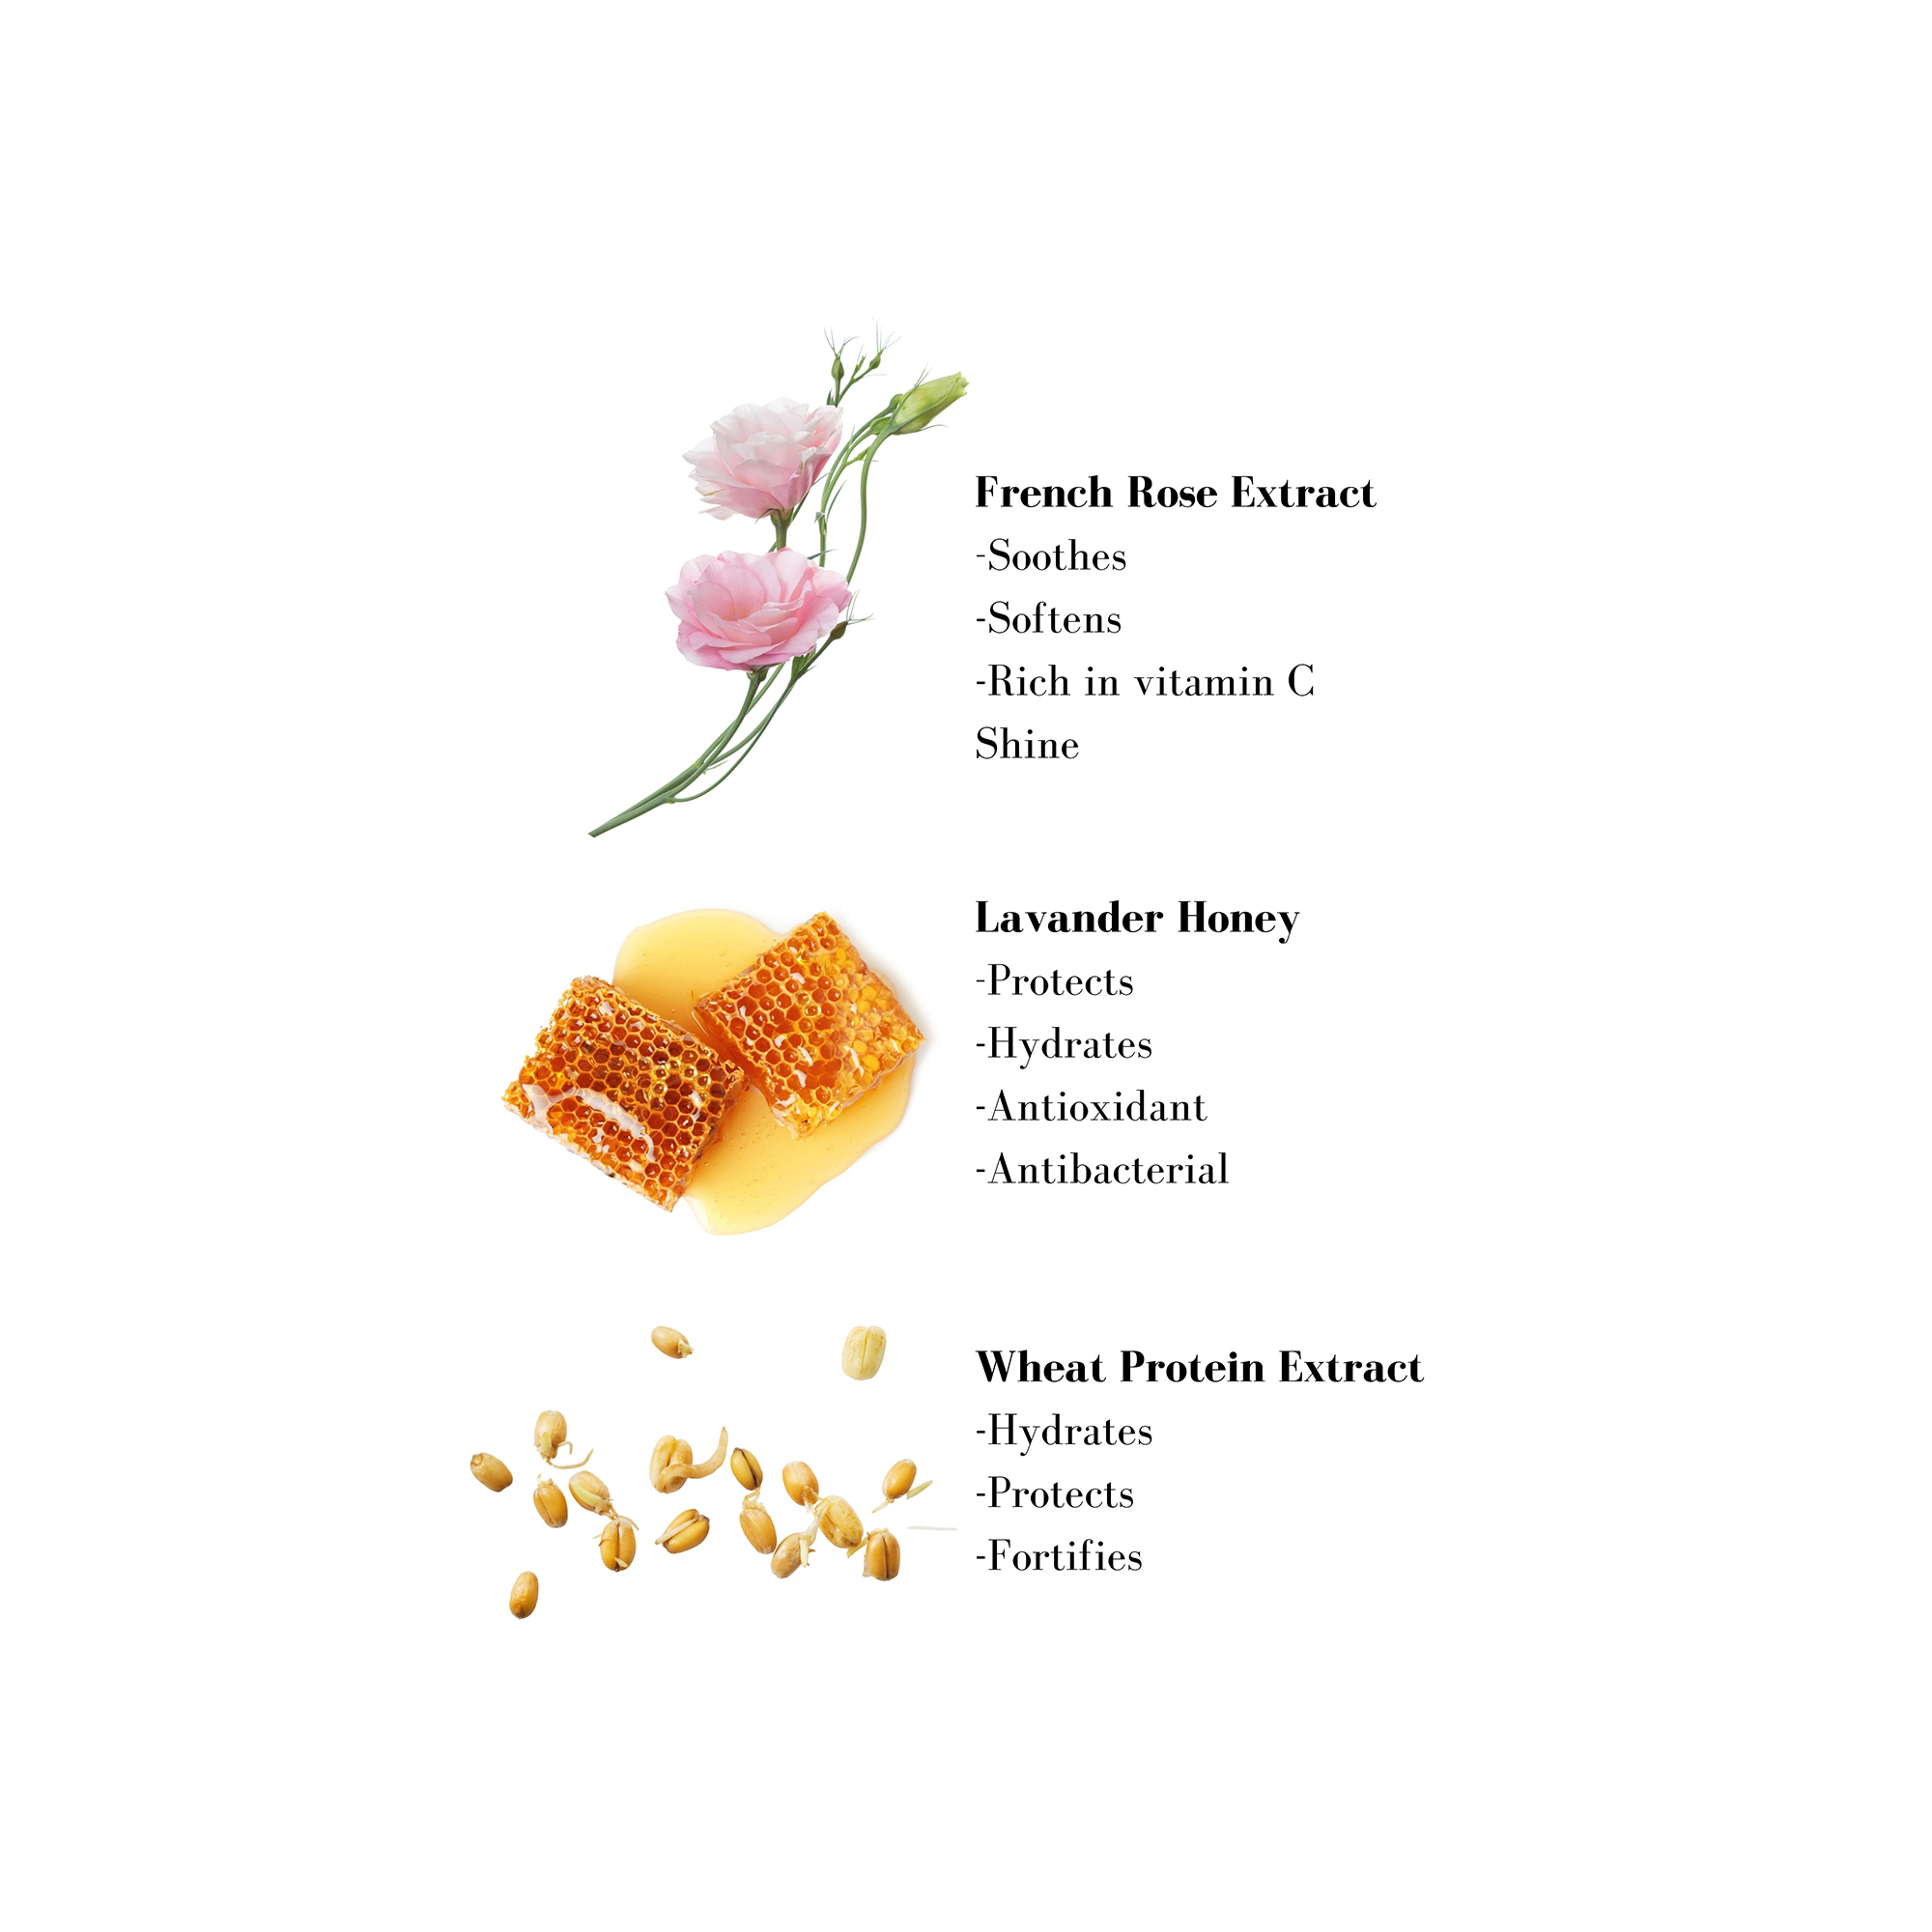 Image 1- French Rose Extract -Soothes -Softens -Rich in vitamin C Shine Lavander Honey -Protects -Hydrates -Antioxidant -Antibacterial Wheat Protein Extract -Hydrates -Protects -Fortifies